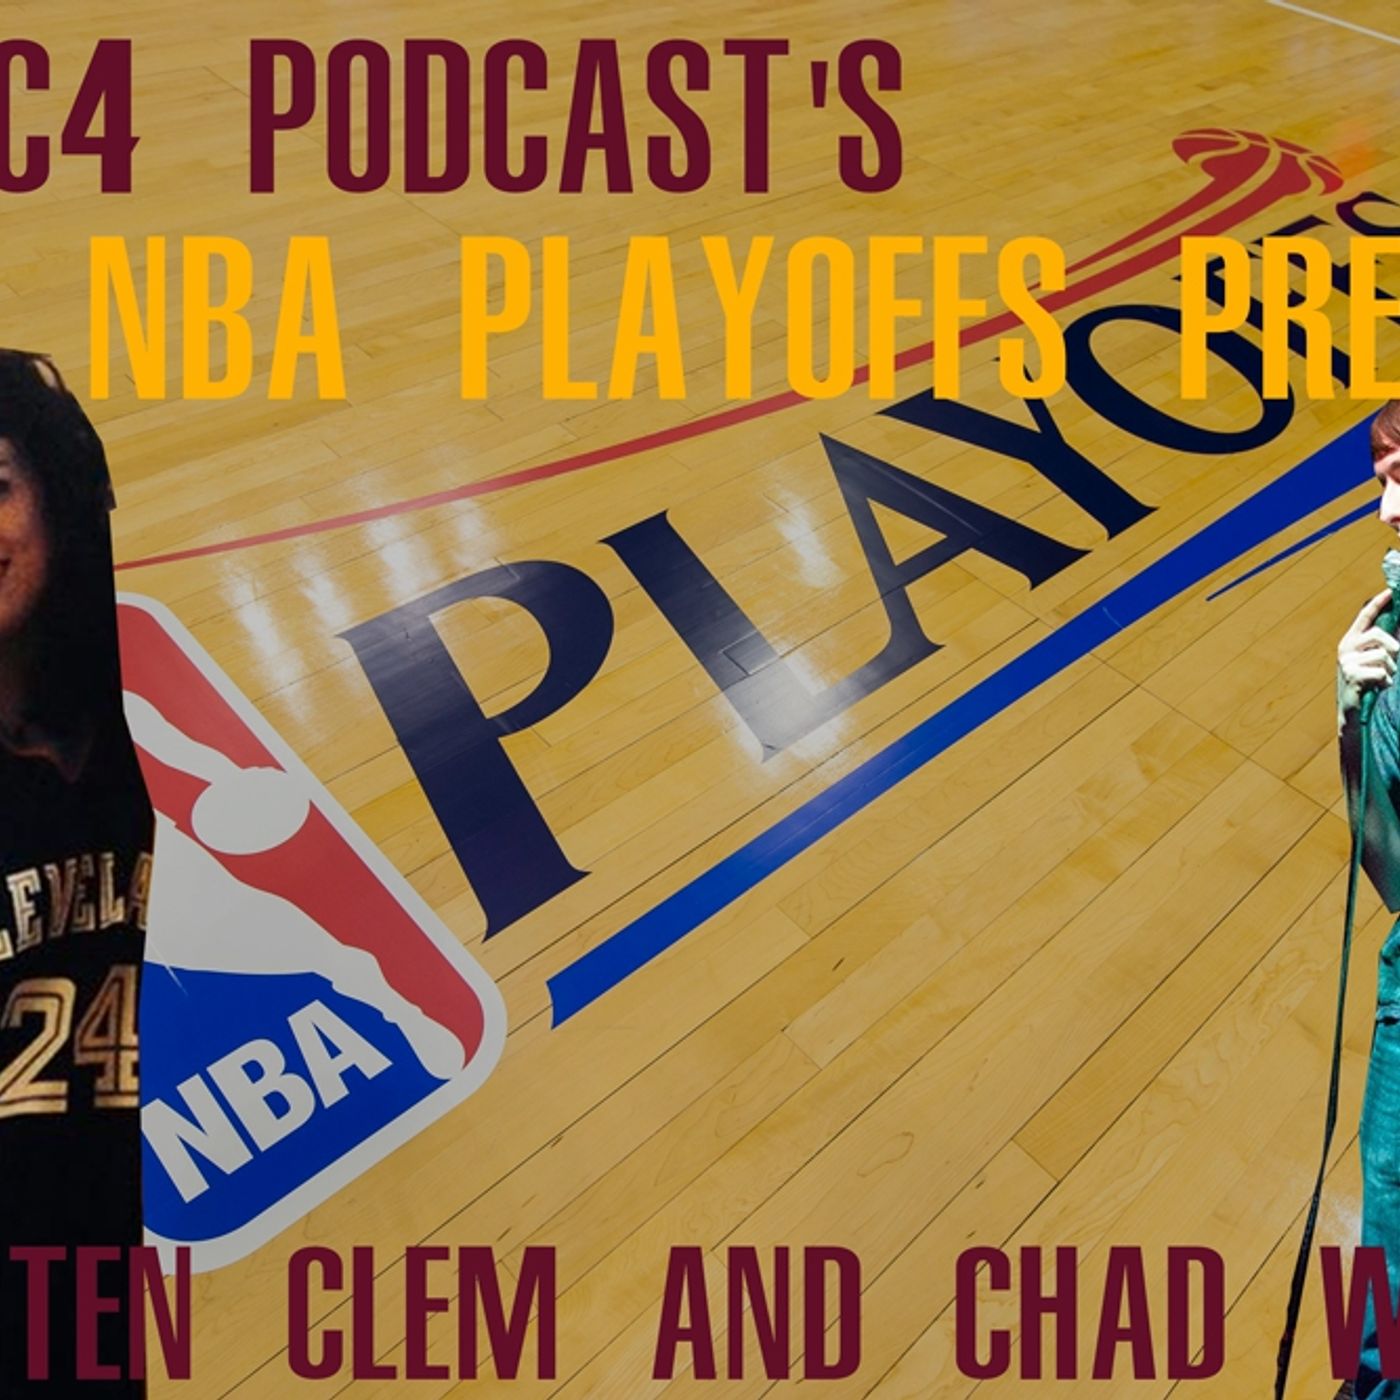 S1 Ep17: Chris Clem’s Cavs Cast #17 - 2015 NBA Playoff Preview with Kristen Clem and Chad Weaver